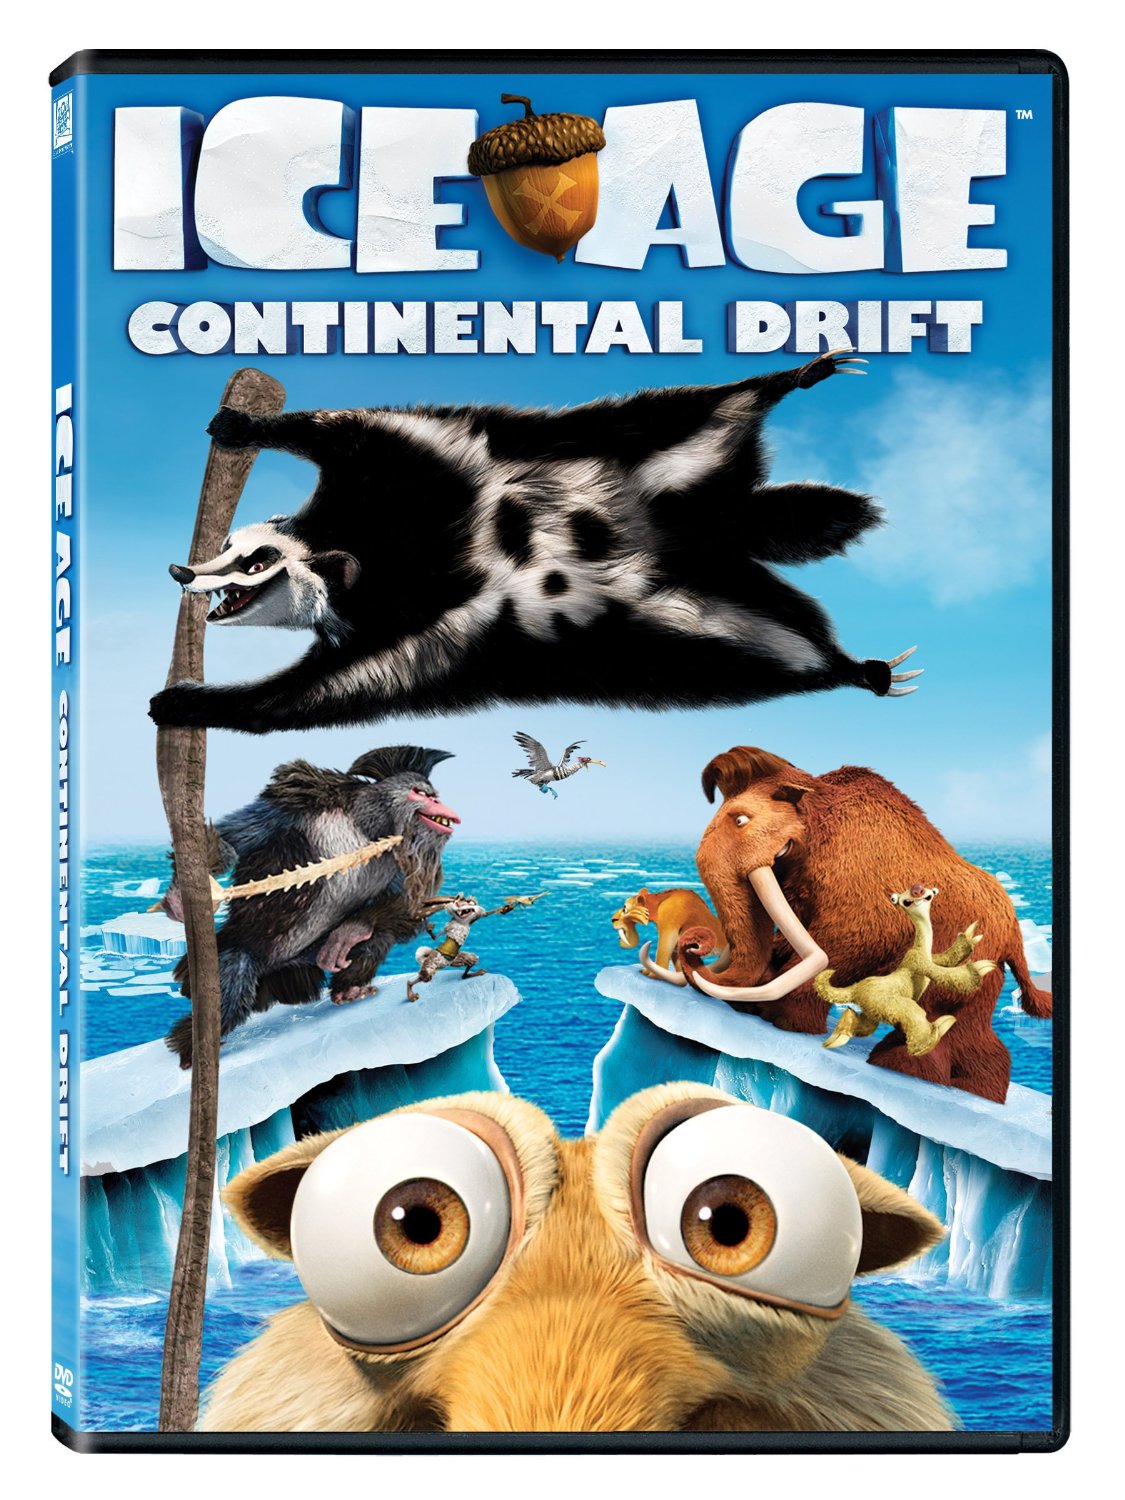 Ice Age Continental Drift DVD Only $5.00 – 75% Savings